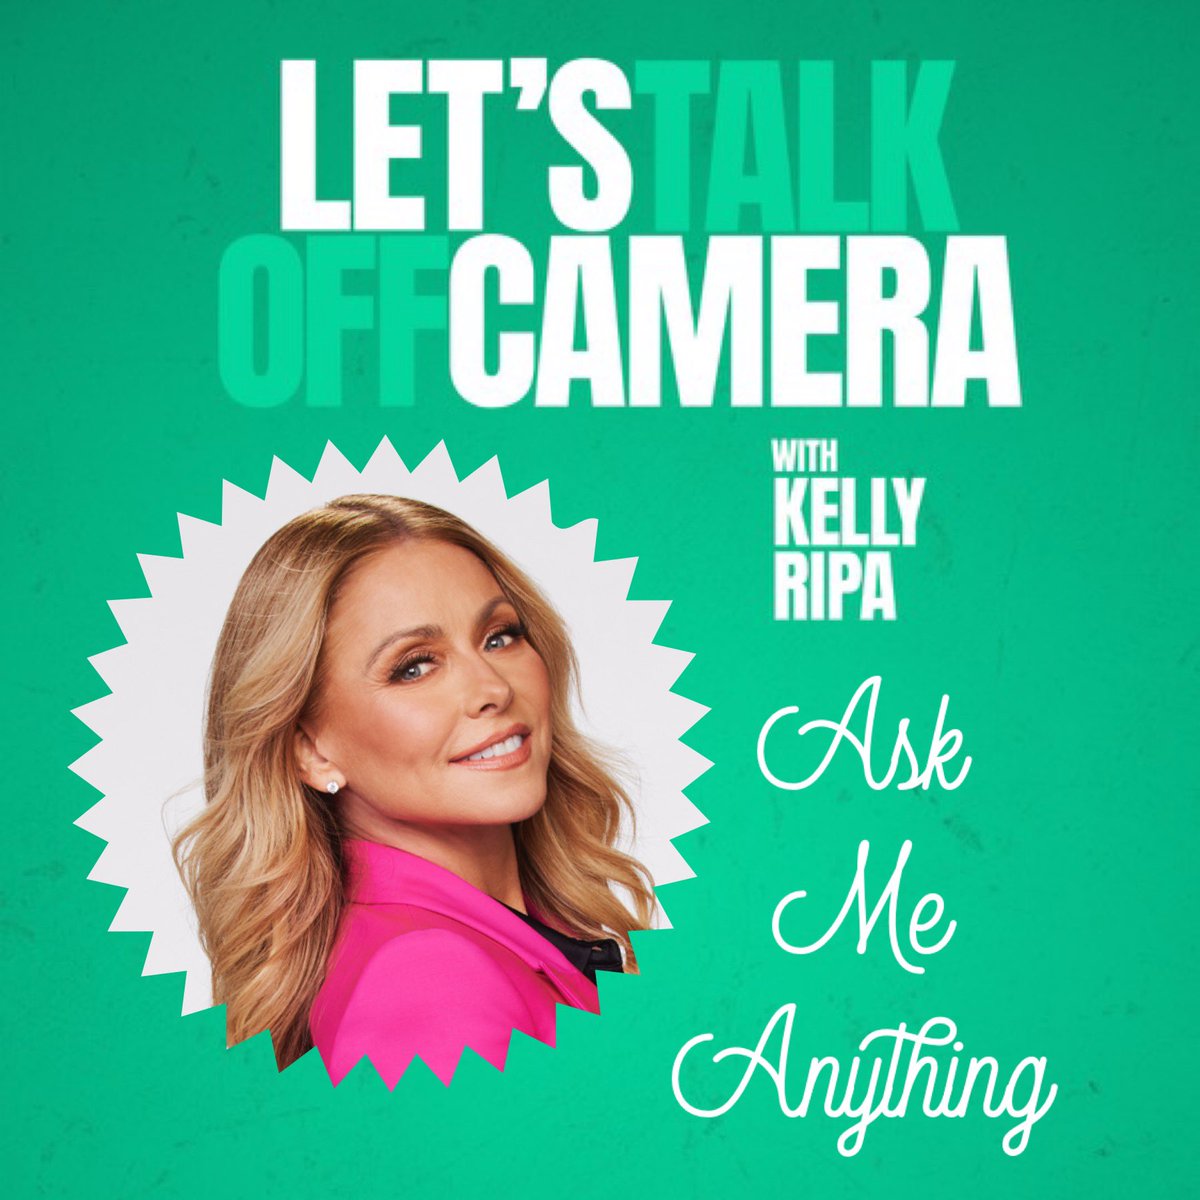 If you had to ask me for advice, what would you ask? I just might answer on my podcast  #LetsTalkOffCamera!!! Tweet me!